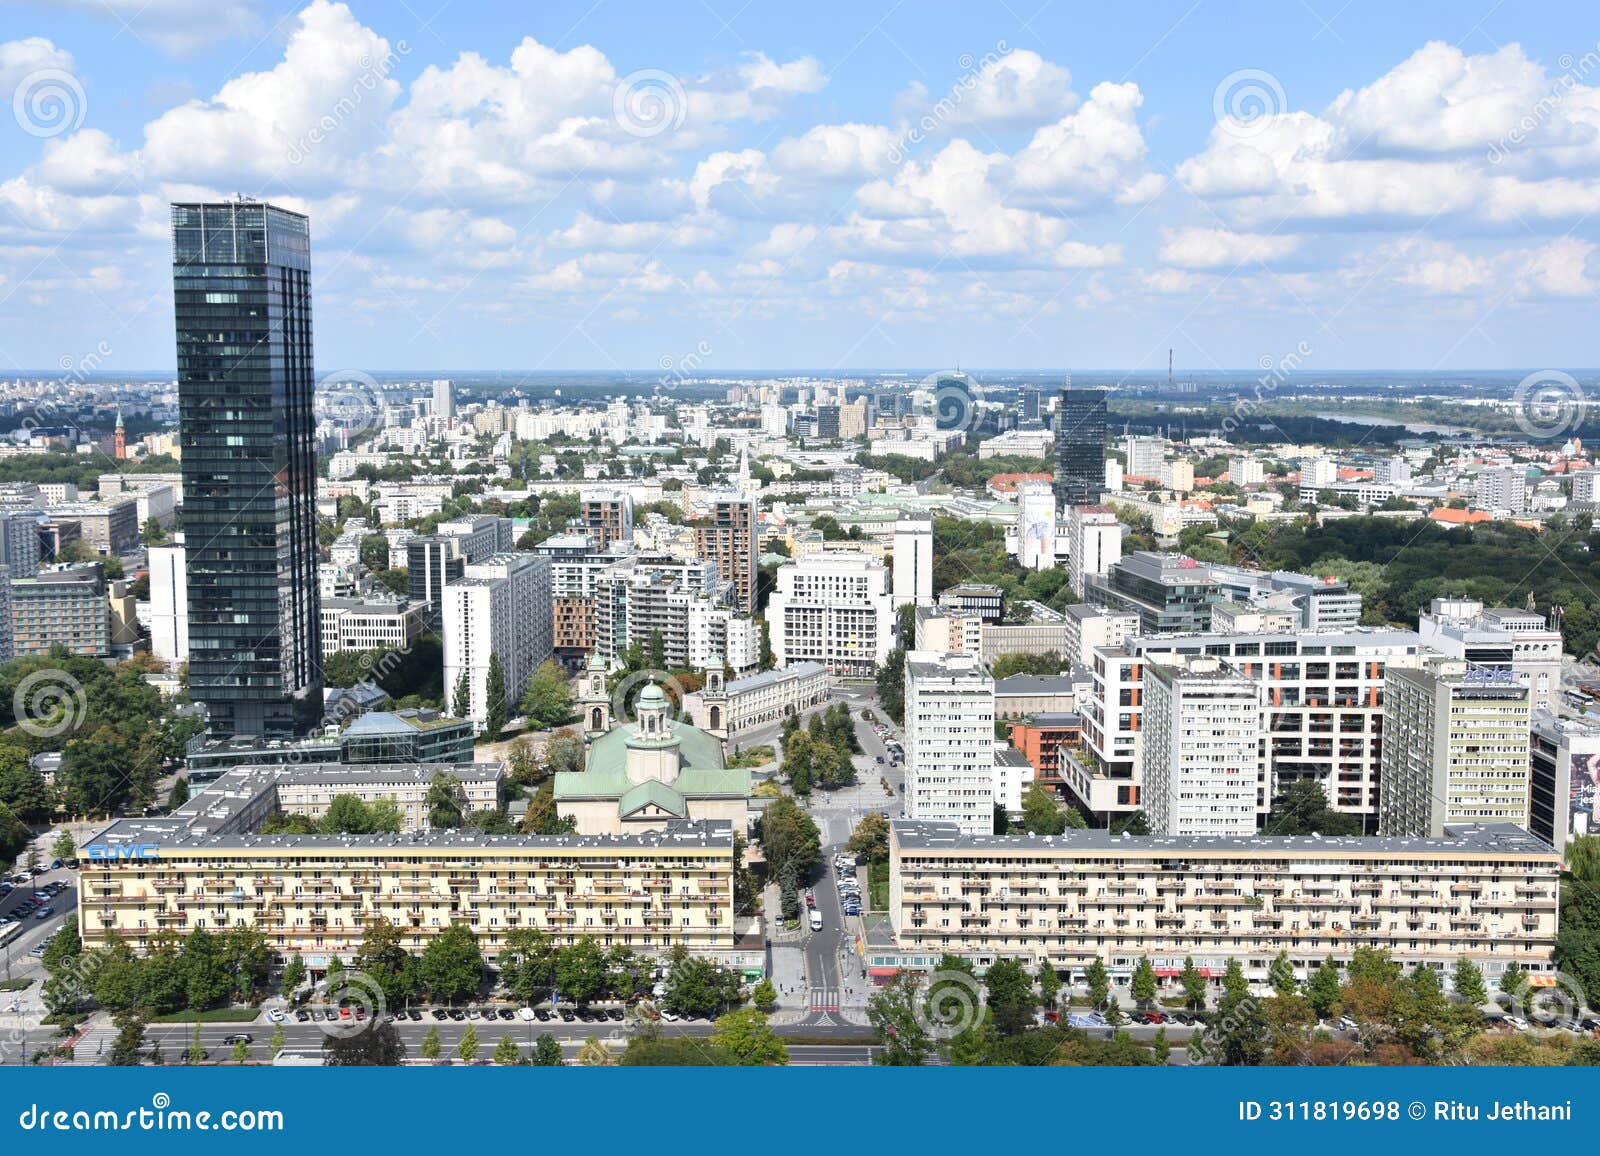 view of centrum, from the observation deck atop the palace of culture and science, in warsaw, poland